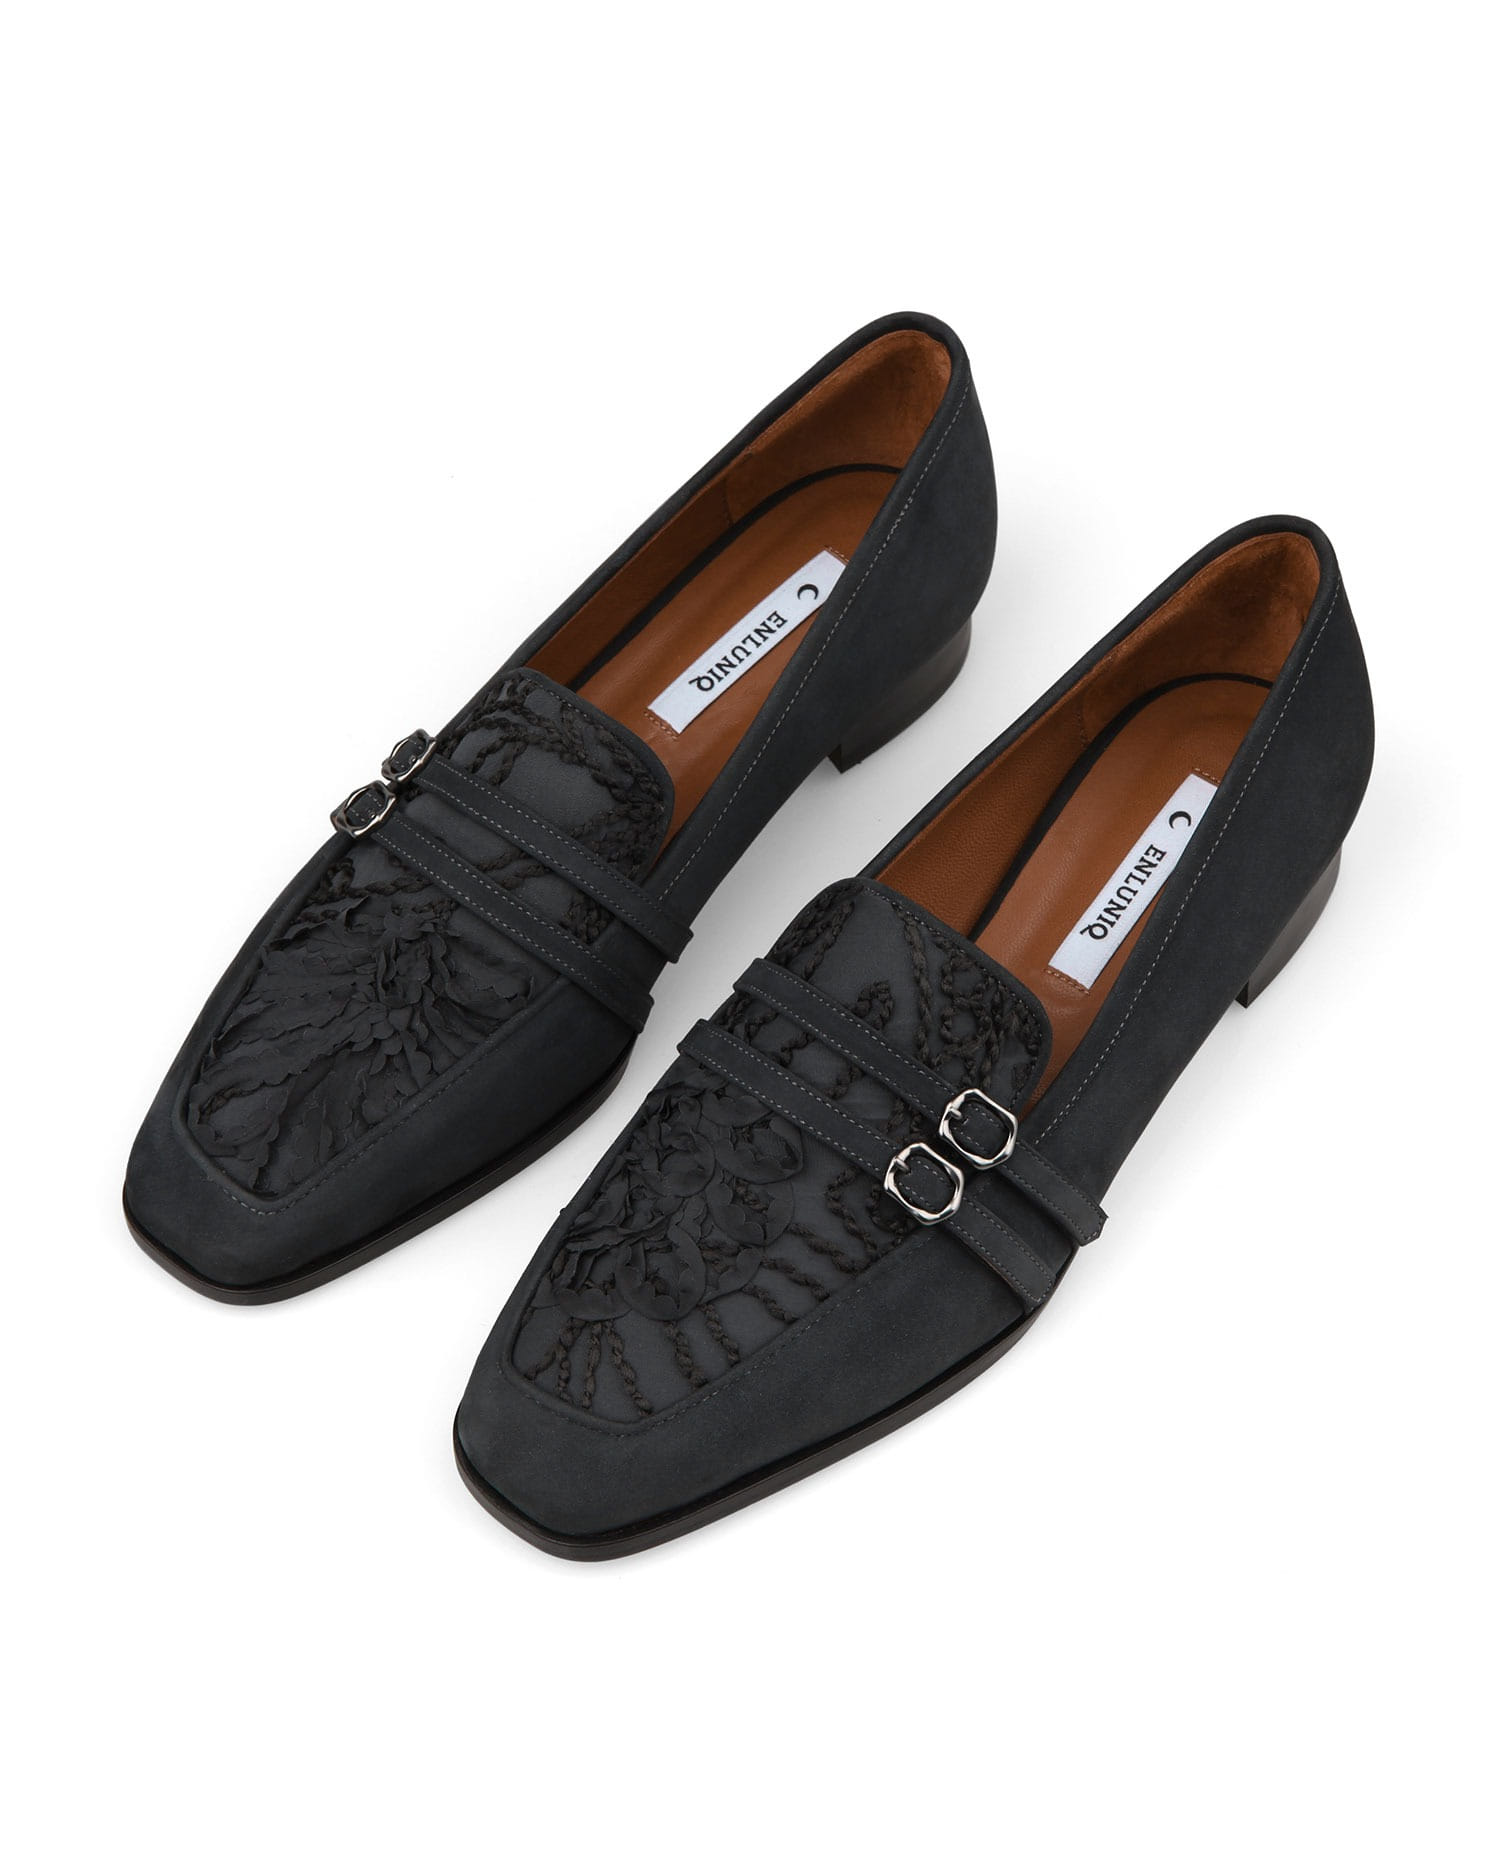 Odd Loafers in Petals - Charcoal